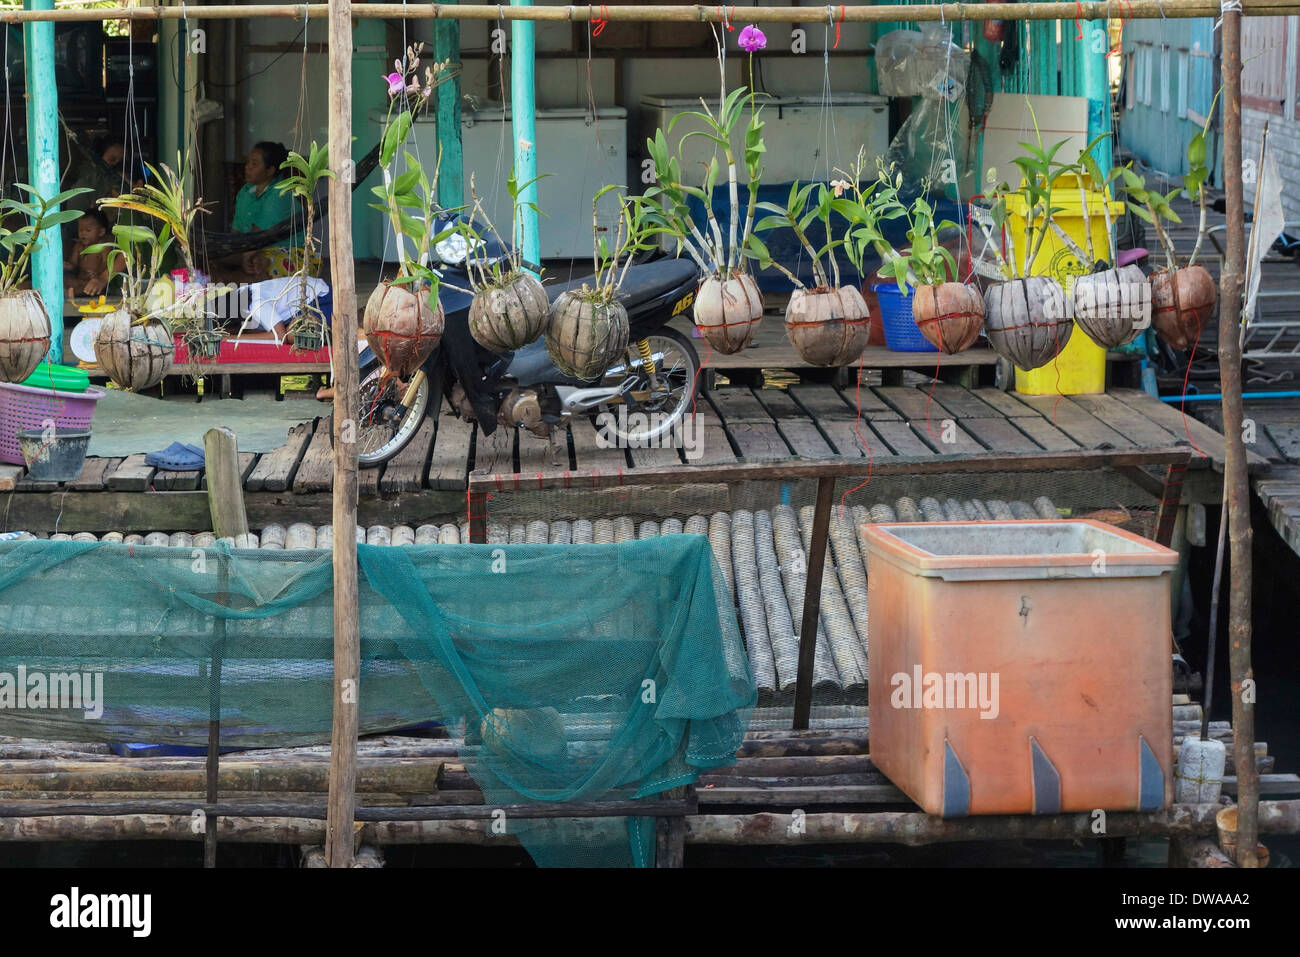 Orchids growing in coconut shell planters on the pier of the fishing village of Ban Ao Yai, Thailand. Stock Photo